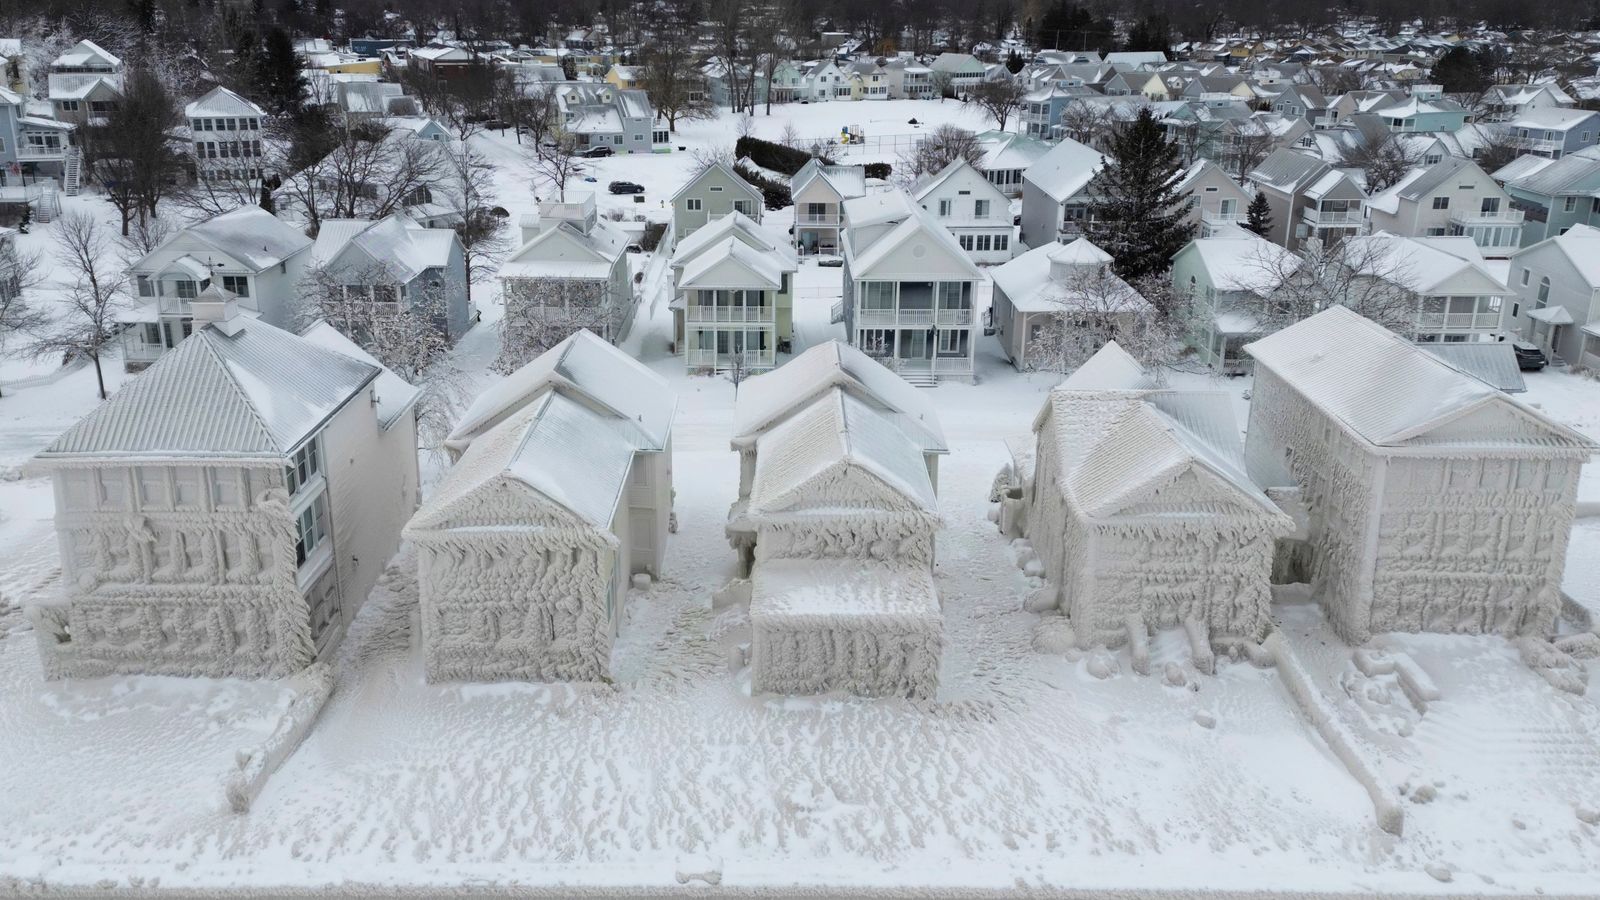 US snow storm covers houses in ice as people struggle to dig out after